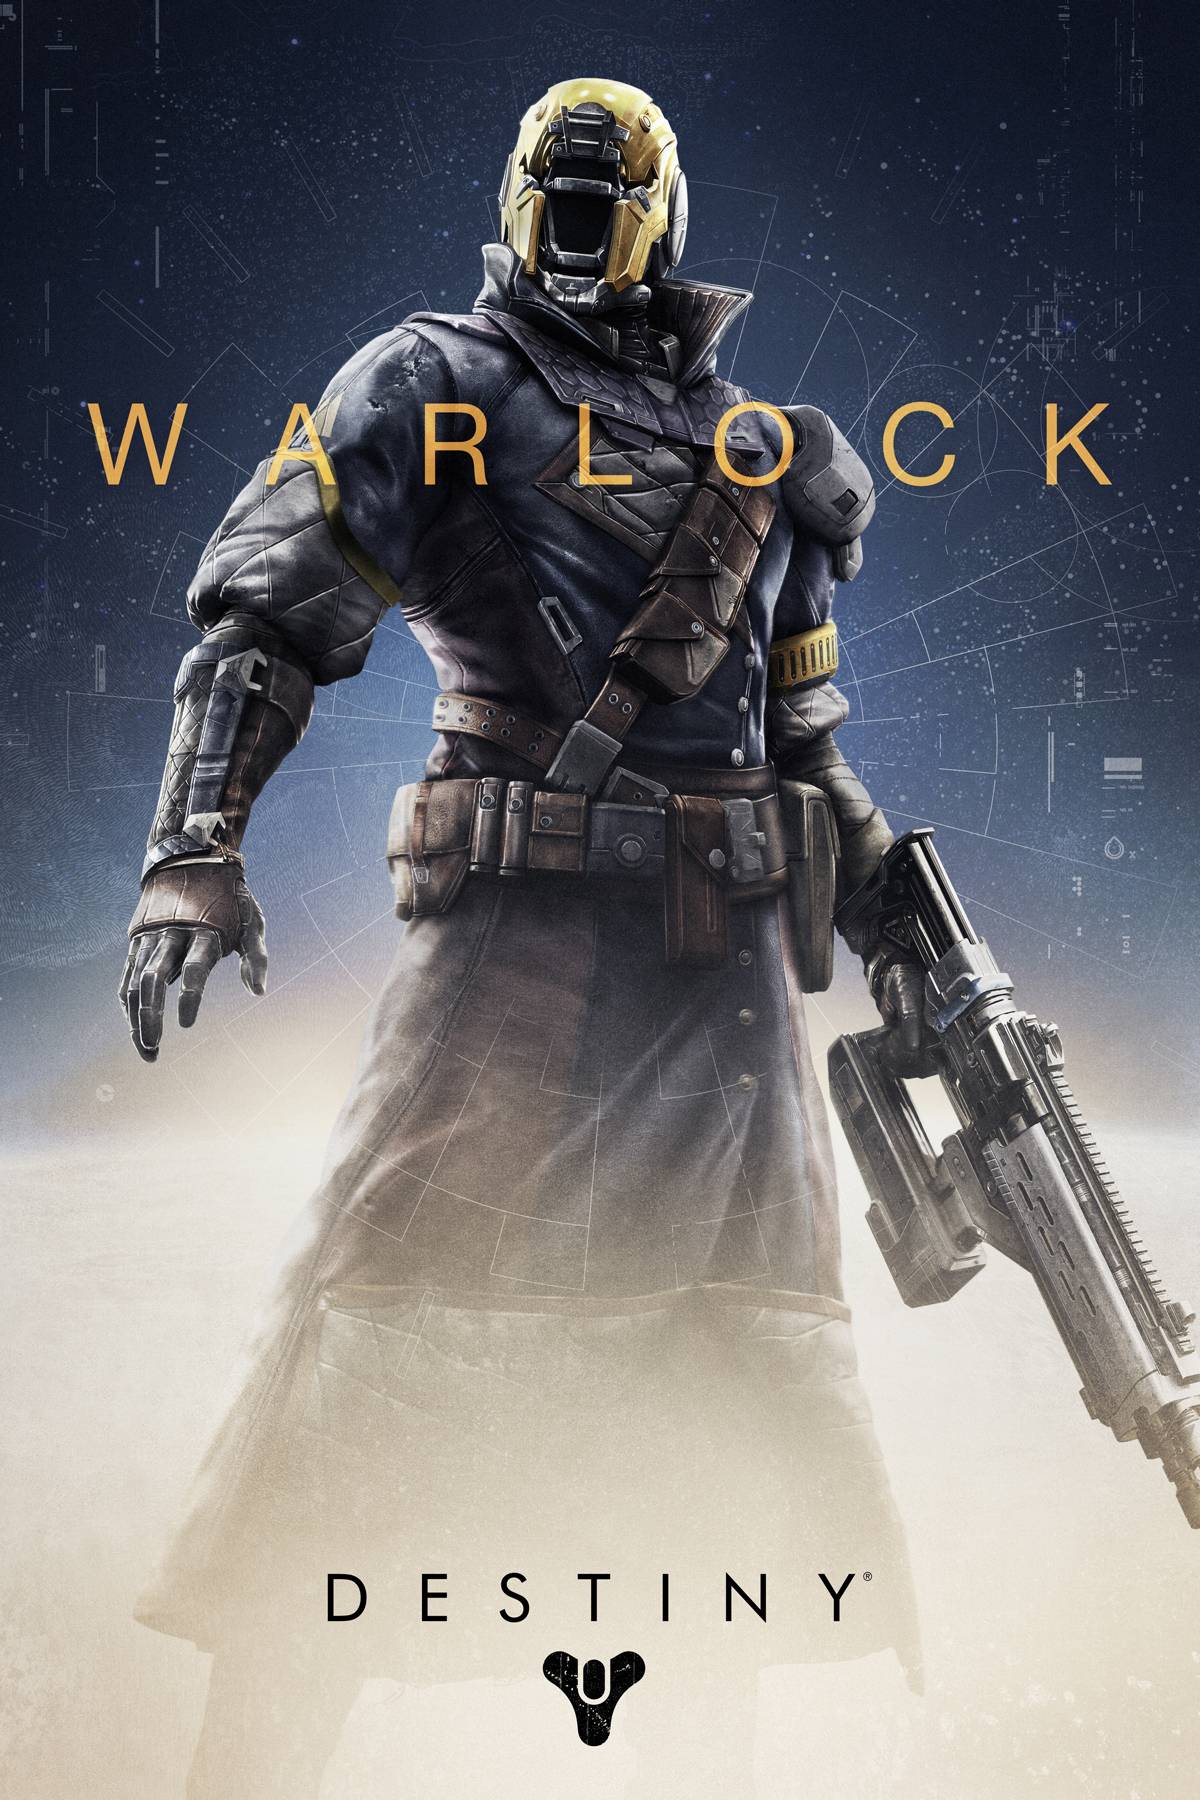 Awesome IPhoneandroid Destiny Wallpaper Warlock DestinyTheGame